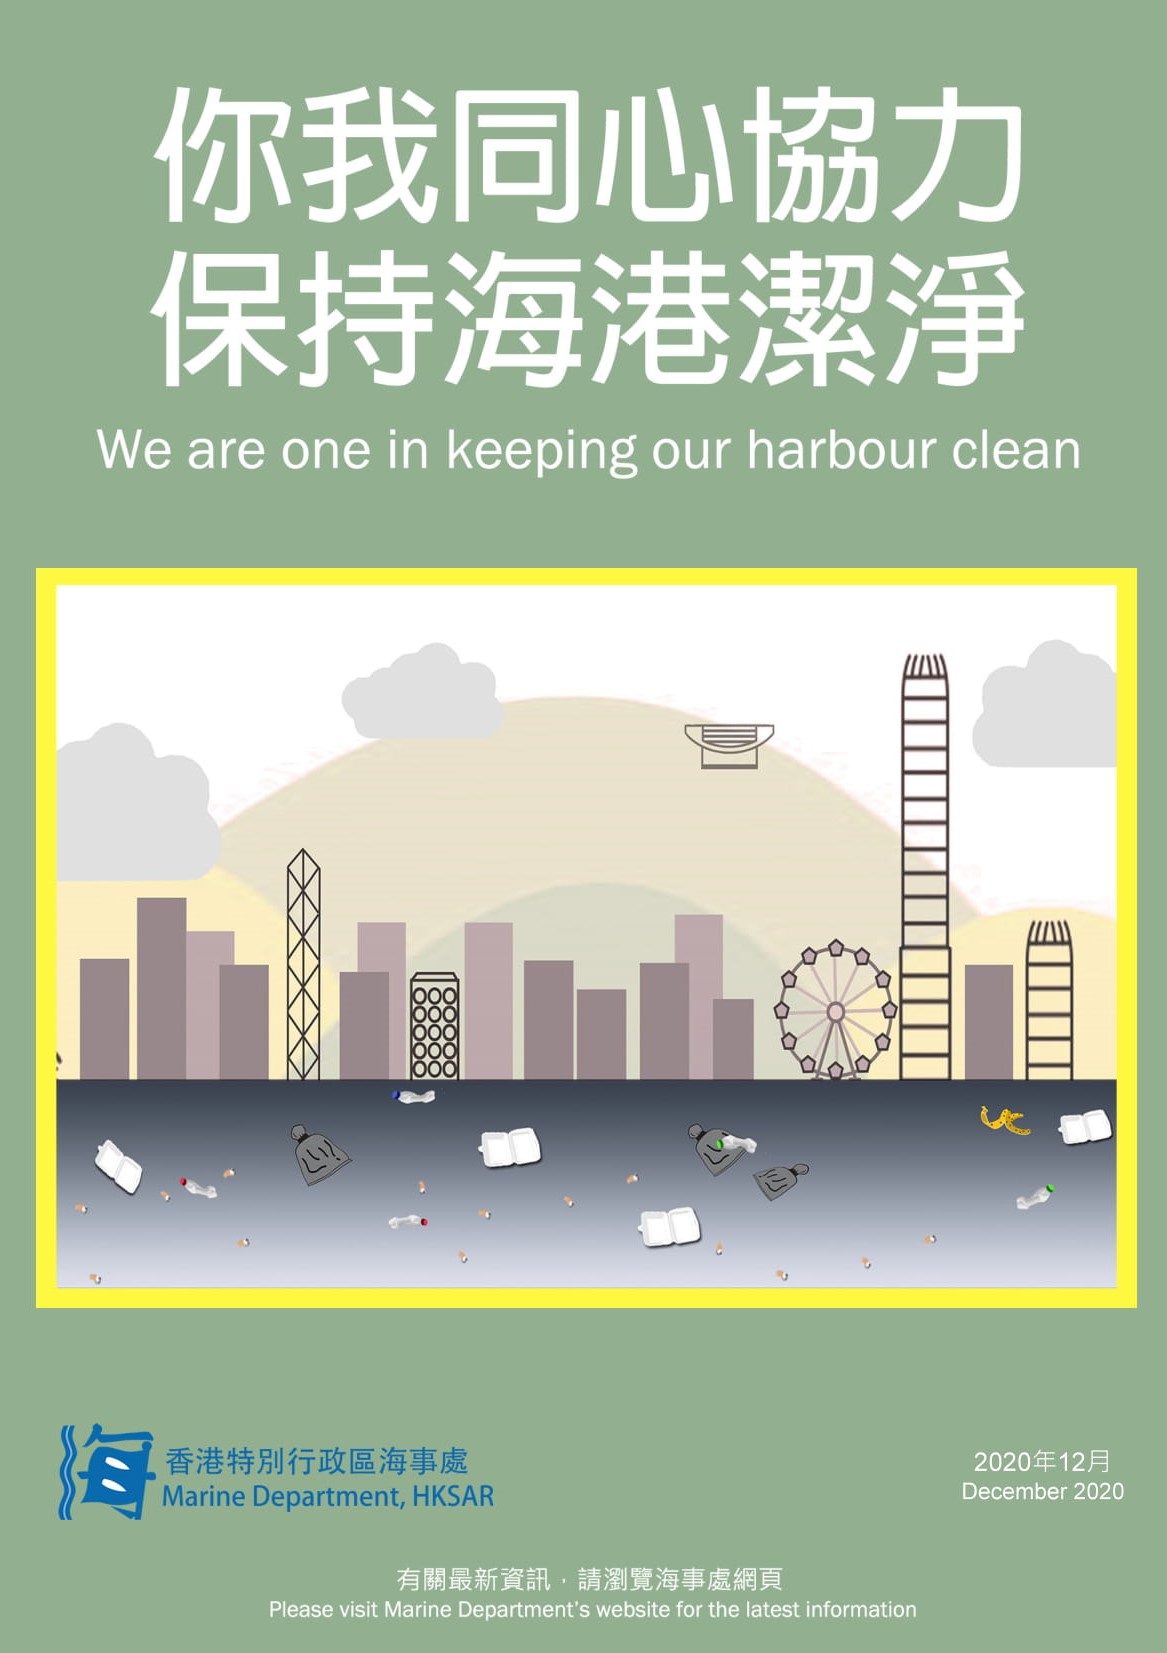 Leaflet by the Marine Department on keeping the harbour clean and reporting marine littering